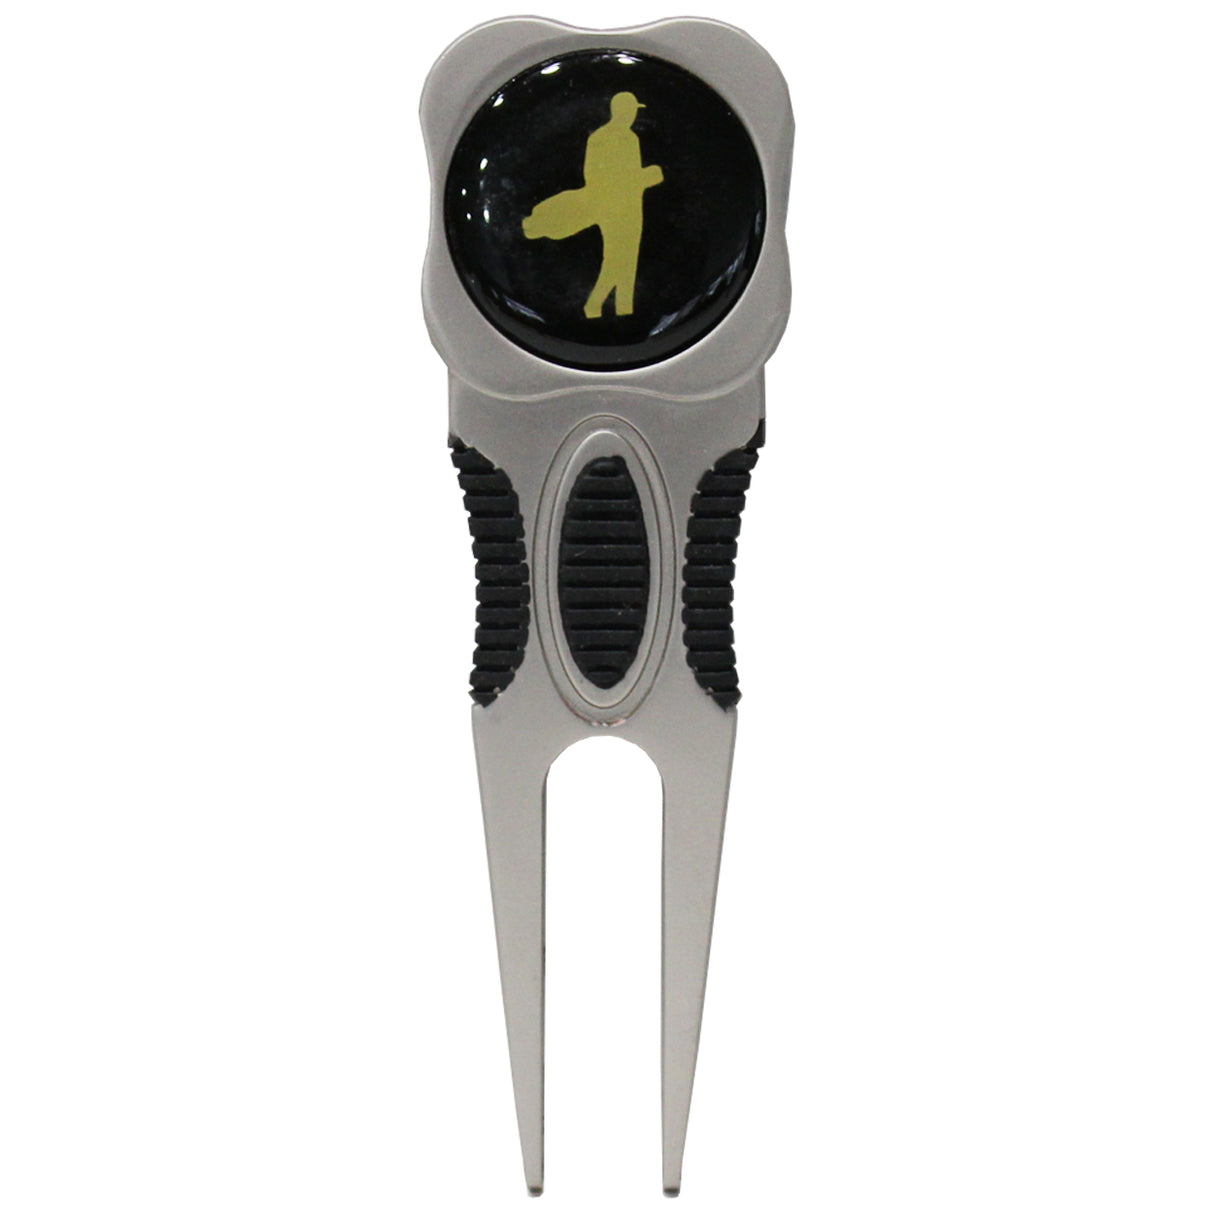 H2 Golf Divot Repair Tool with Magnetic Ball Marker